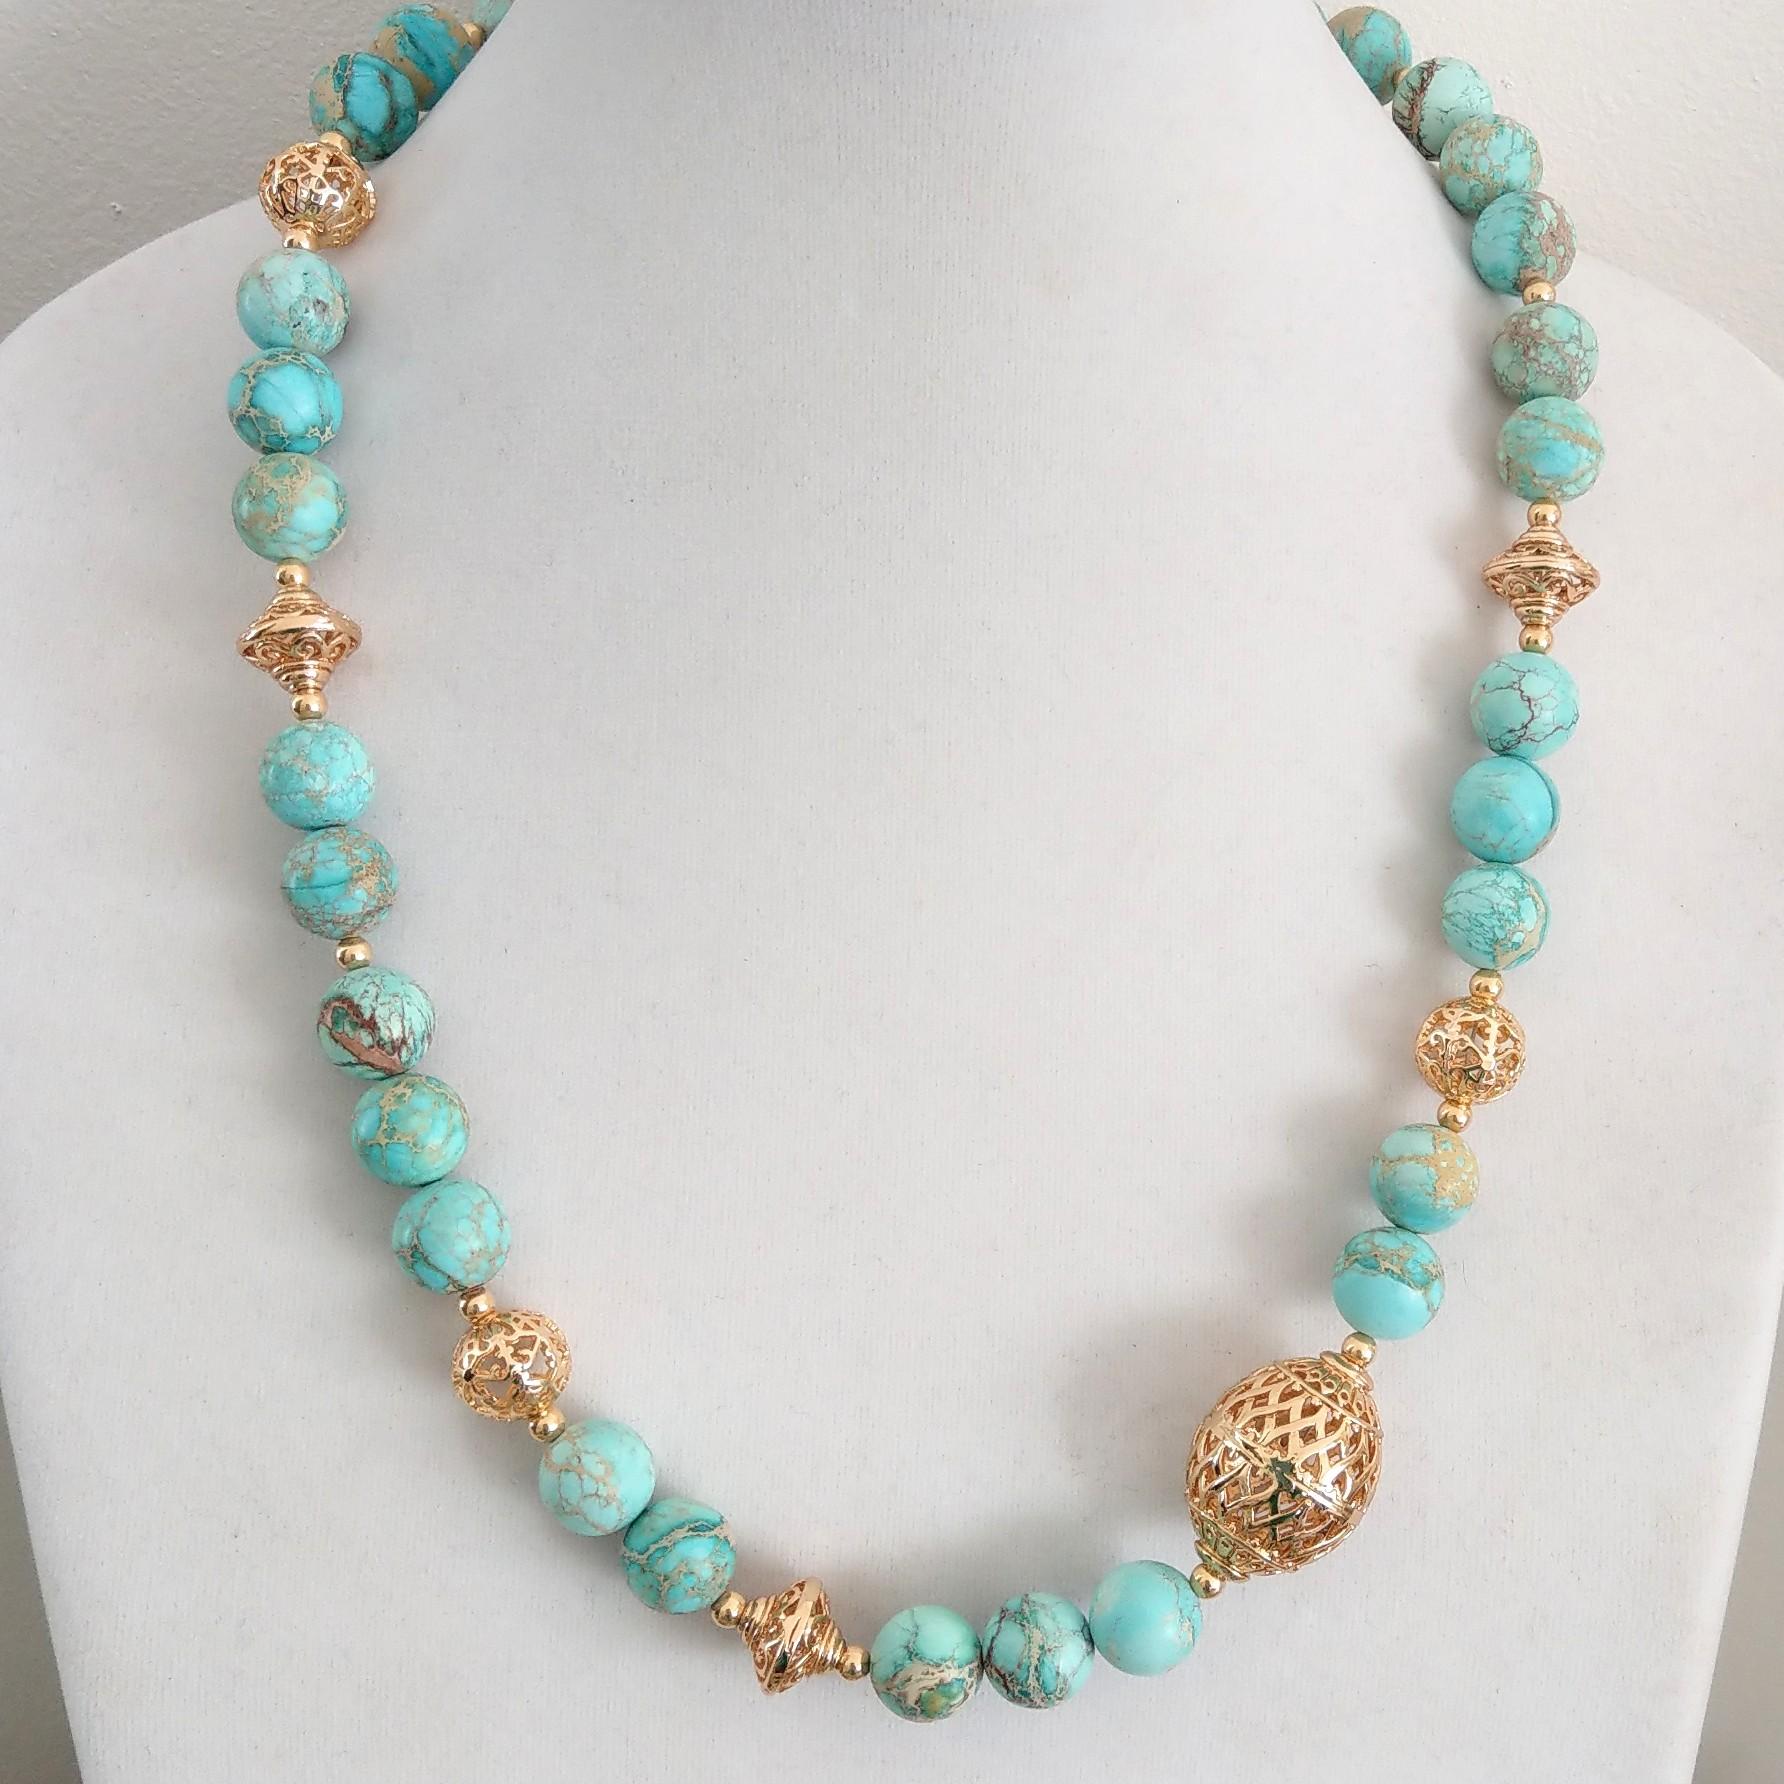 Delicate Blue Impression Jasper matt polished 12mm beads with Statement 14k Gold filled beads.
Necklace has largest bead is 19x28mm with 12mm Filligree round beads and a Gold plate Sterling Silver Hook Clasp 44mm

Finished necklace measures 58cm
